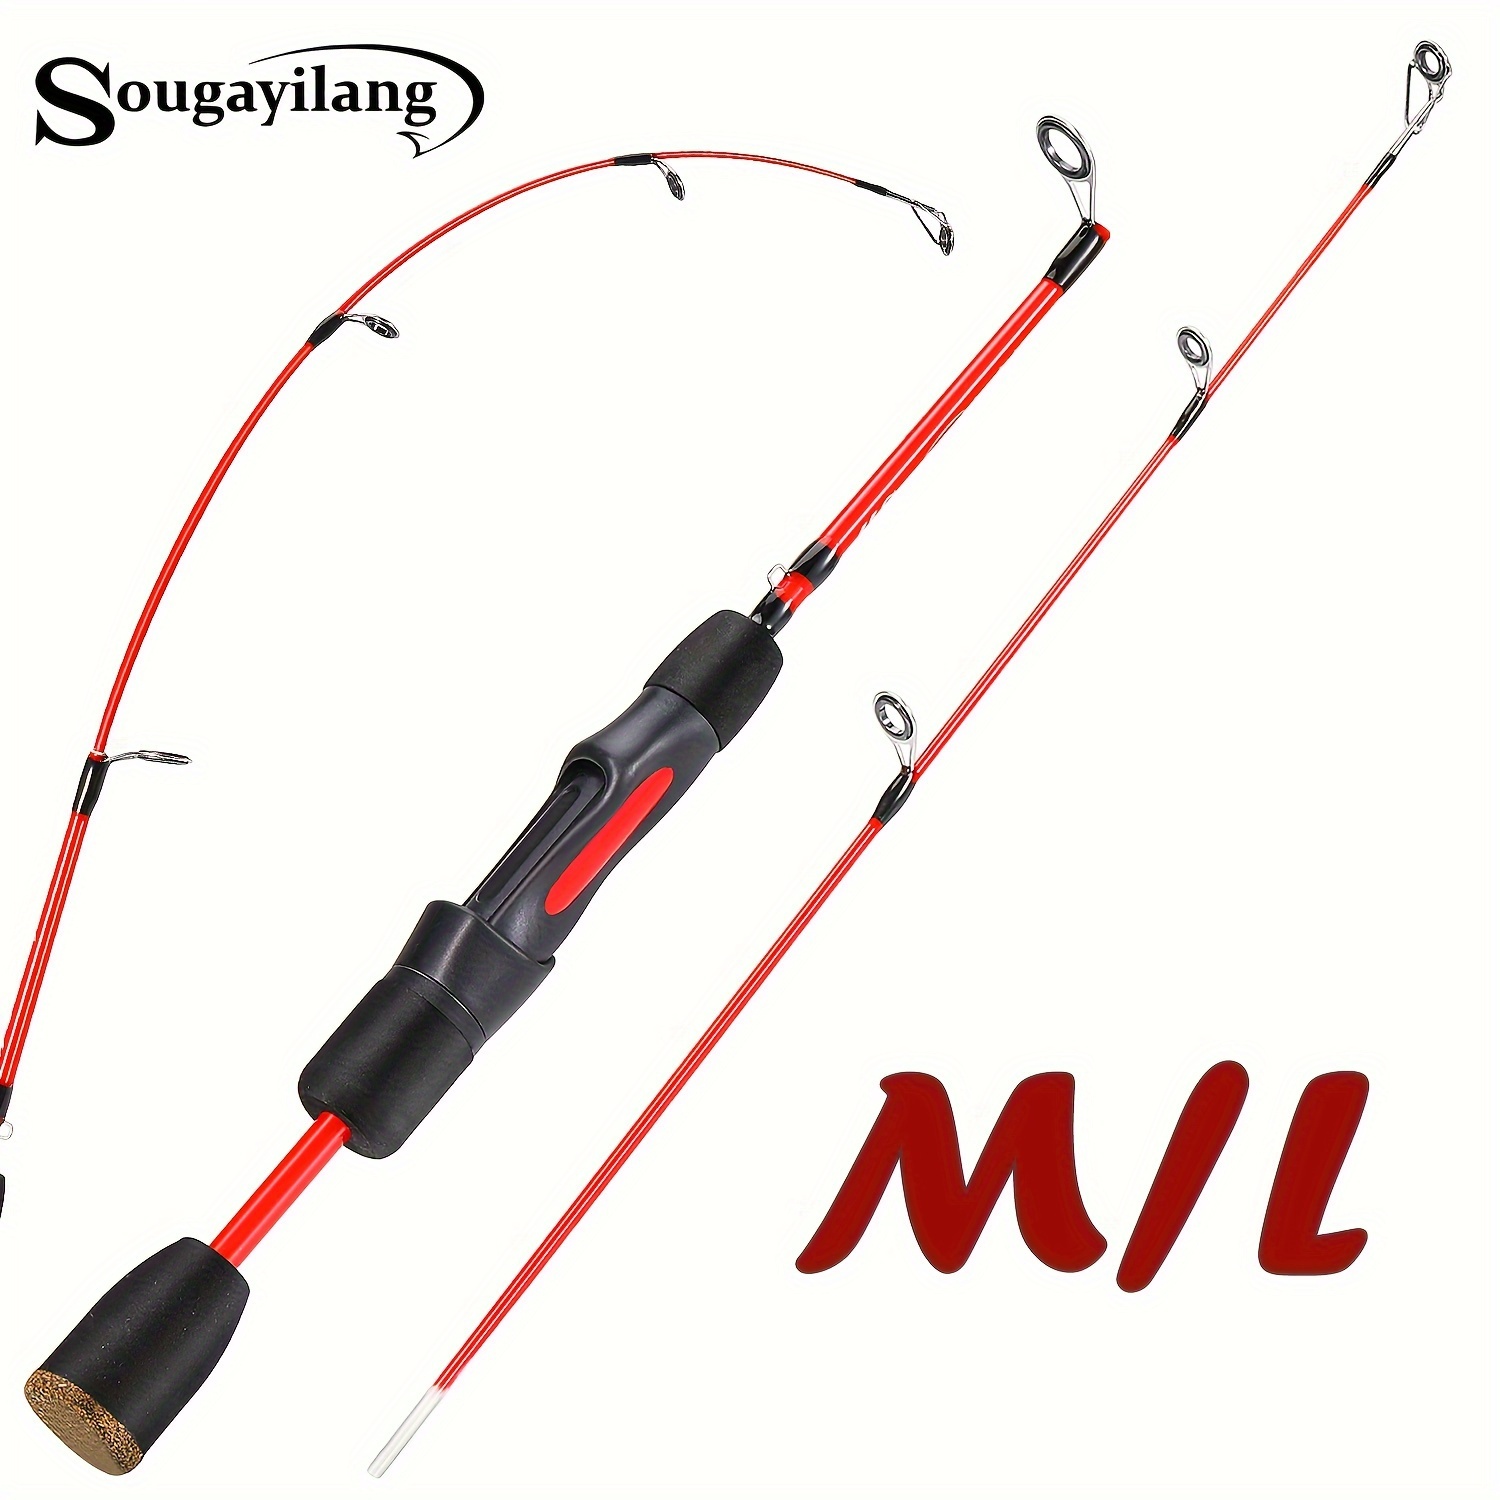 Sougayilang 1pc M/L Ice Fishing Rod, 2 Sections Ultralight Fishing Pole,  Portable Ice Fishing Rod With EVA Handle For Freshwater Winter Travelling  Fis